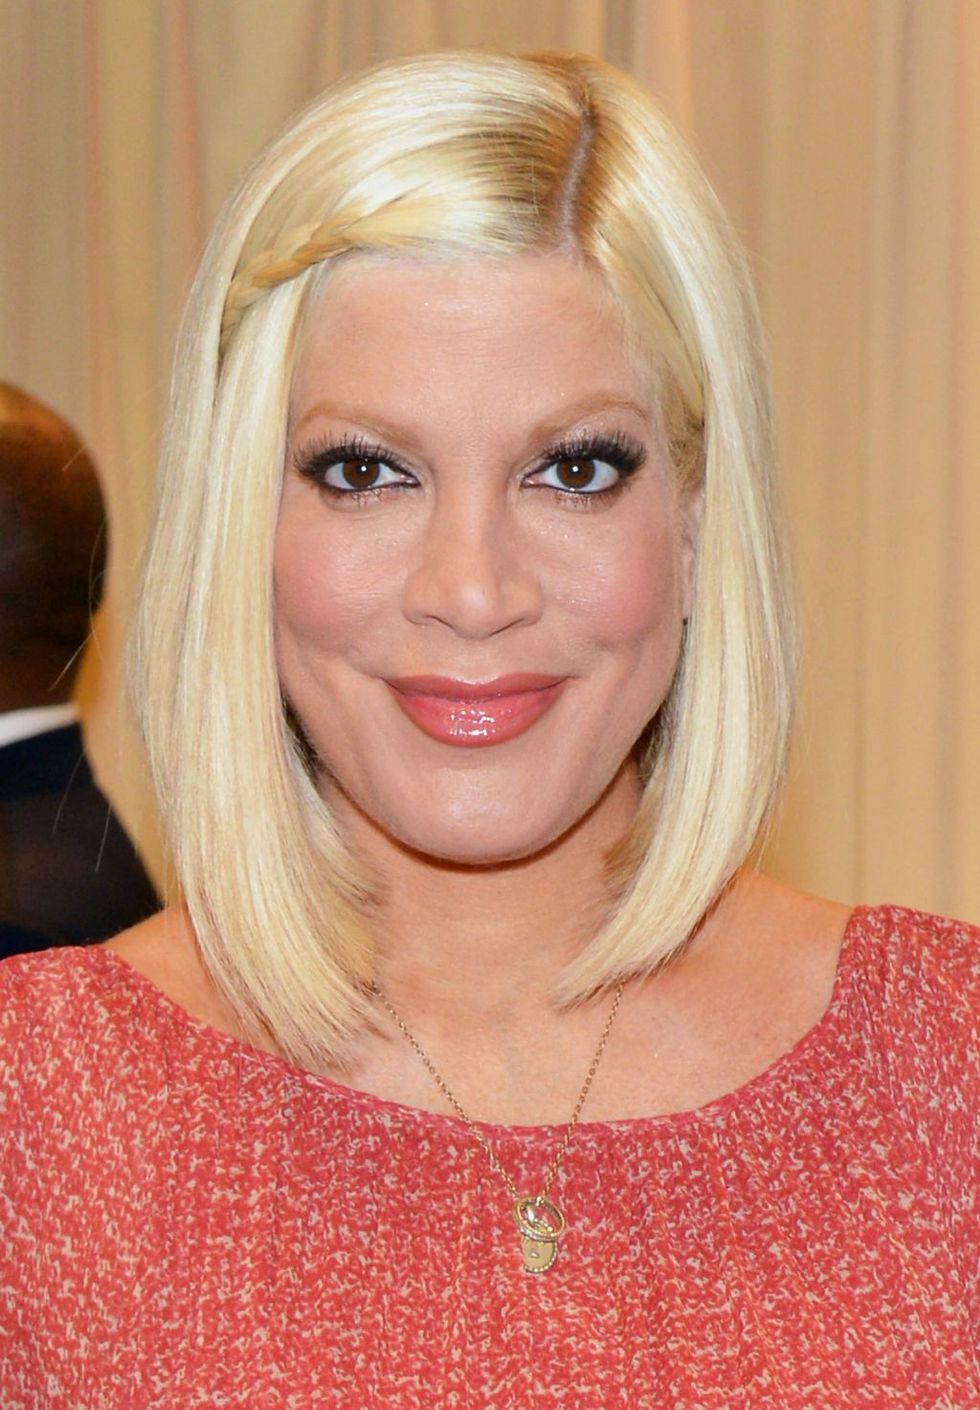 <p>Daughter of showrunner&nbsp;Aaron Spelling, Tori Spelling played good girl Donna Martin. Since the&nbsp;series ended, Tori has starred in countless made-for-TV movies, including Lifetime's&nbsp;<em data-redactor-tag="em" data-verified="redactor">Mind Over Murder, </em><span class="redactor-invisible-space" data-verified="redactor" data-redactor-tag="span" data-redactor-class="redactor-invisible-space">where she met now-husband </span>Dean McDermott on set<span class="redactor-invisible-space" data-verified="redactor" data-redactor-tag="span" data-redactor-class="redactor-invisible-space">. Since the couple married in 2006, they have appeared in a number of&nbsp;reality shows, including <em data-redactor-tag="em" data-verified="redactor">Tori &amp; Dean </em>and<em data-redactor-tag="em" data-verified="redactor"> True Tori</em>, which documented the <a href="http://www.dailymail.co.uk/tvshowbiz/article-2601082/Tori-Spellings-reality-HER-struggles-forgive-love-cheat-husband.html" target="_blank" data-tracking-id="recirc-text-link">couple's marriage troubles</a>.&nbsp;They've since reconciled, recently announcing that they have a fifth child on the way.&nbsp;Tori is also the author of six books; her most recent&nbsp;was 2013's <em data-redactor-tag="em" data-verified="redactor"><a href="https://www.amazon.com/Spelling-Like-Tori-ebook/dp/B00A25EZ4K/ref=asap_bc?ie=UTF8" target="_blank" data-tracking-id="recirc-text-link">Spelling It Like It Is</a></em>.&nbsp;</span></p>